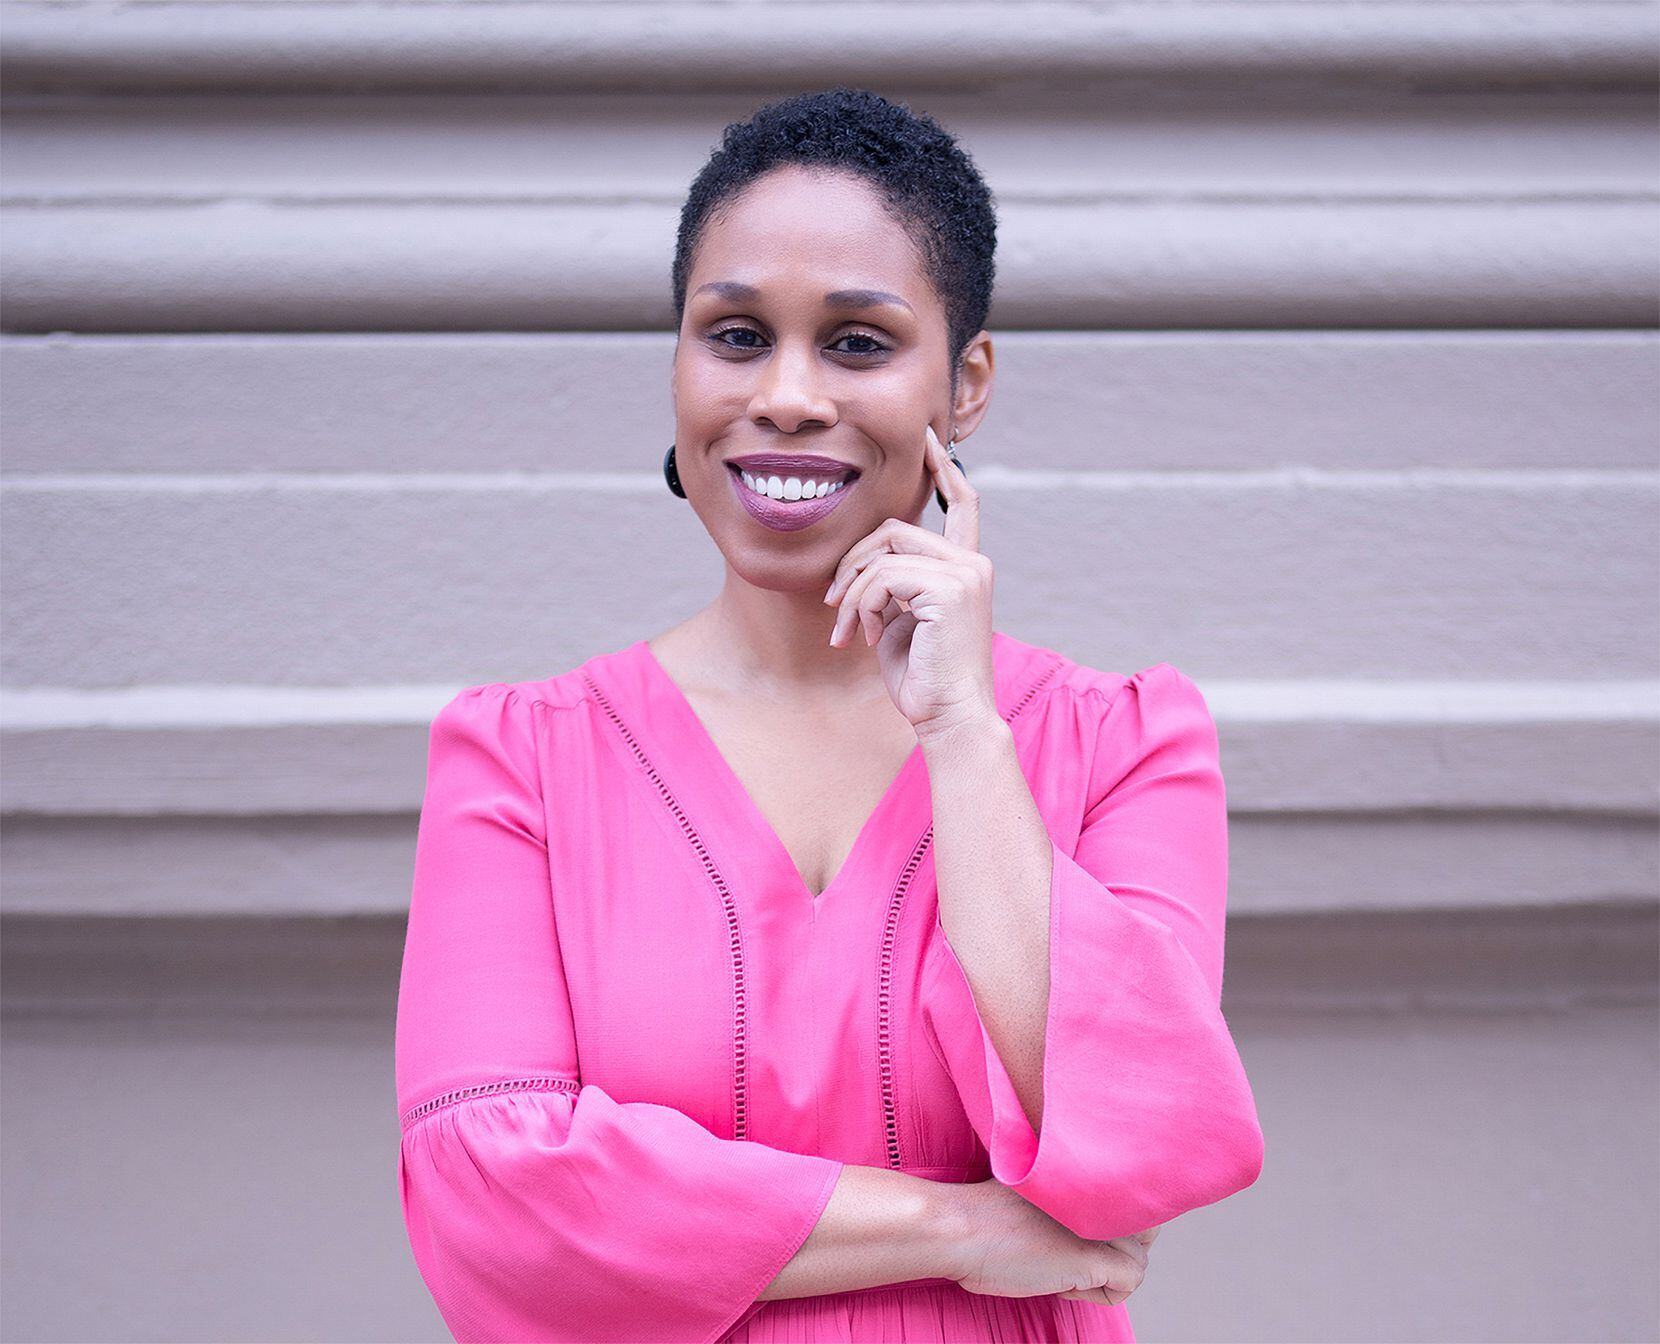 Dr. Oni Blackstock, a New York HIV physician and founder of Health Justice.